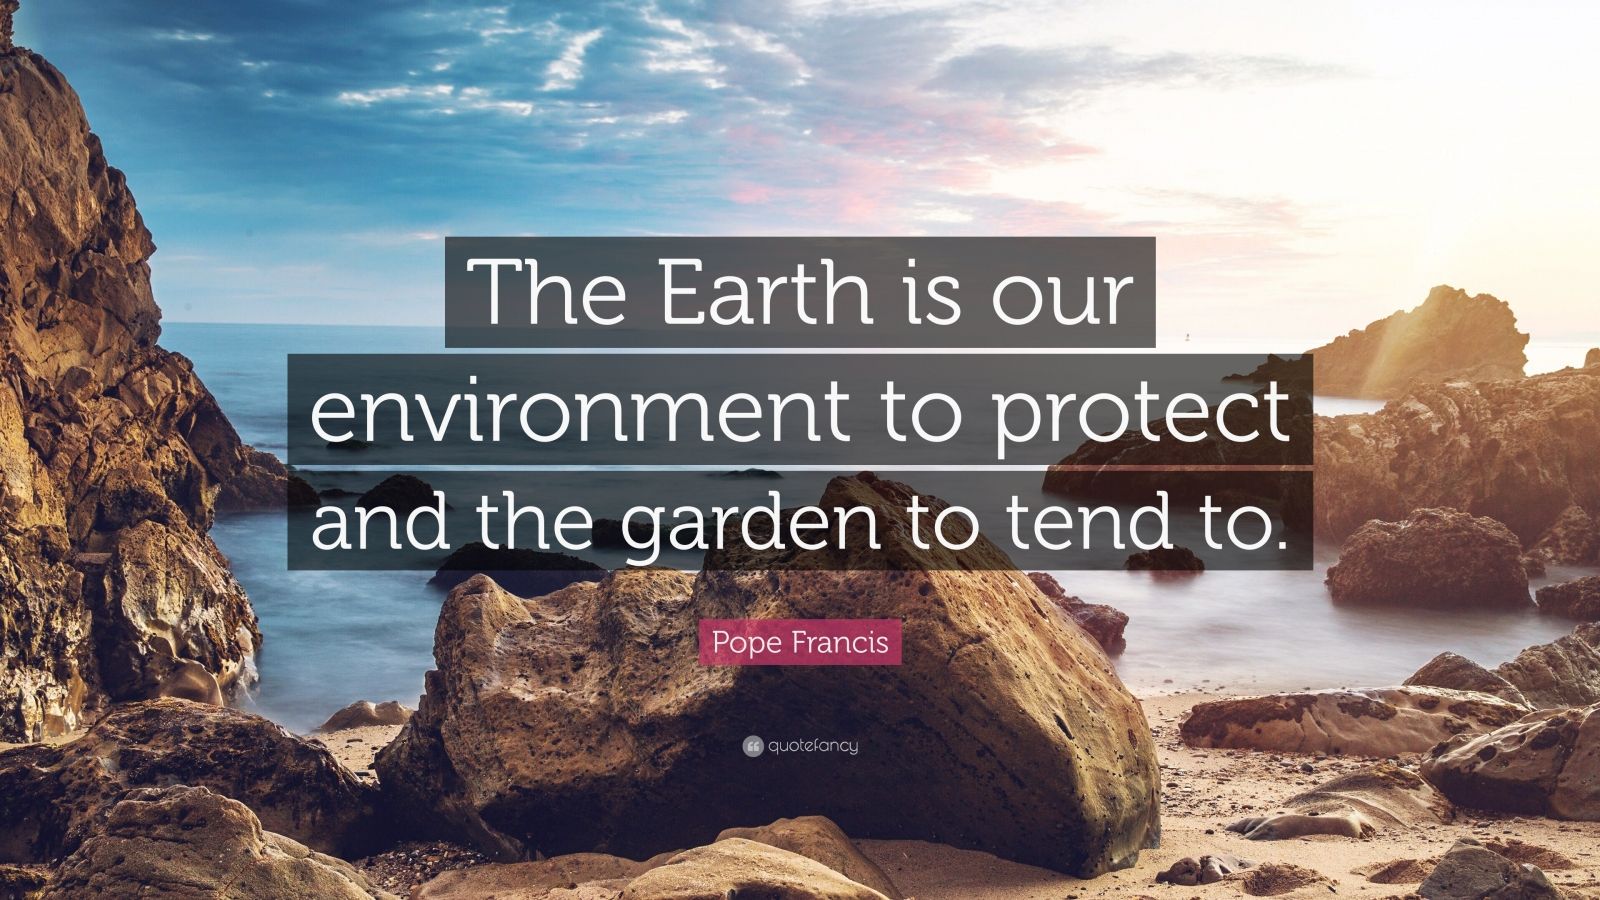 2873919 Pope Francis Quote The Earth is our environment to protect and the